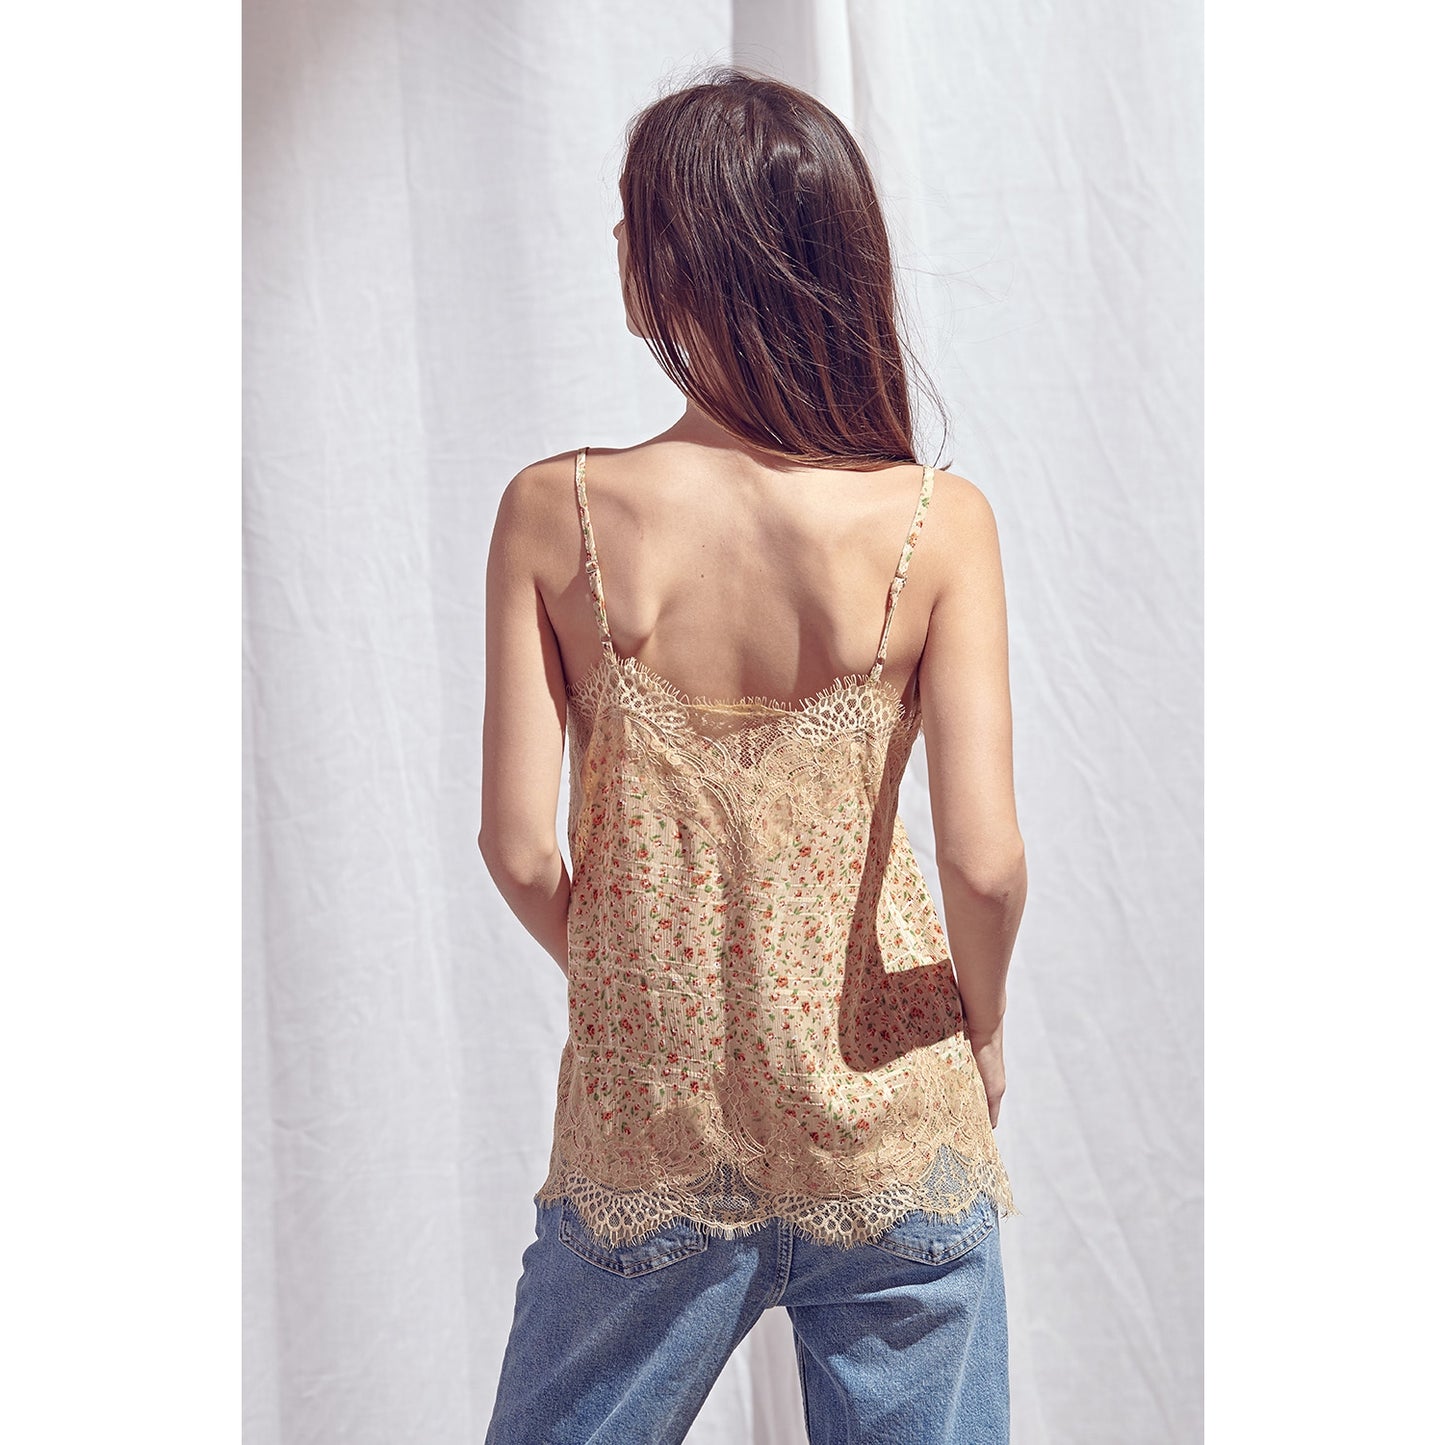 Floral Ditsy Lace Cami Tank Top - Wild Luxe Boutique